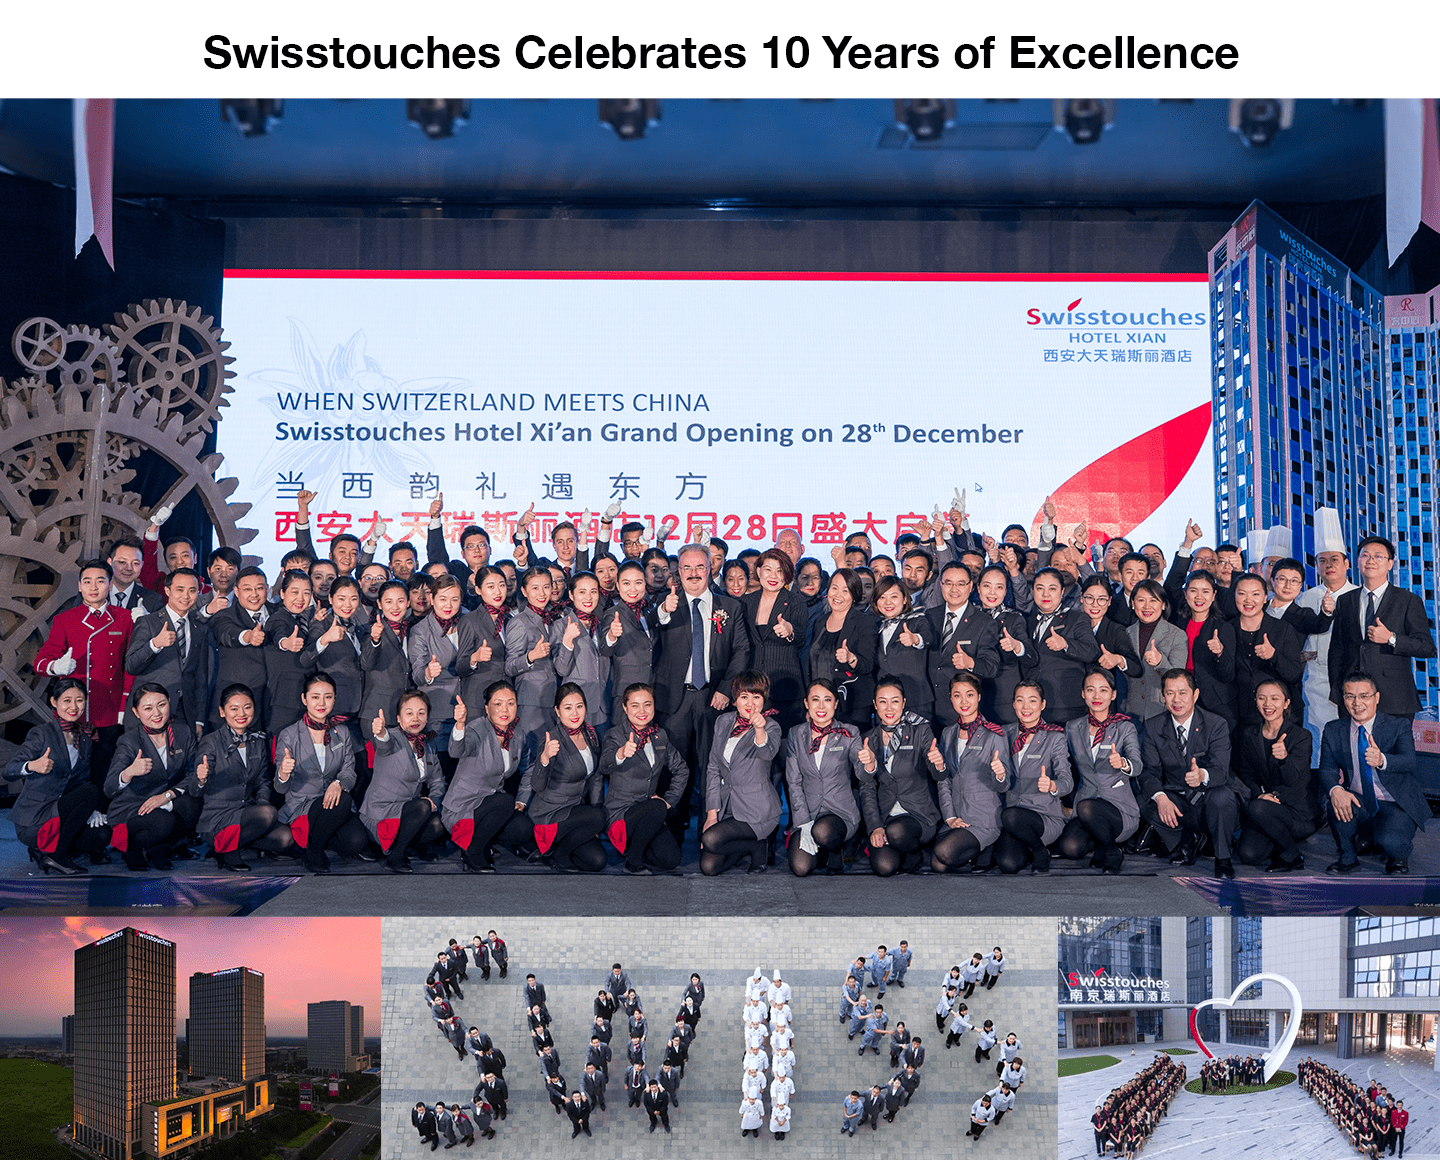 Swisstouches Celebrates 10 Years of Excellence